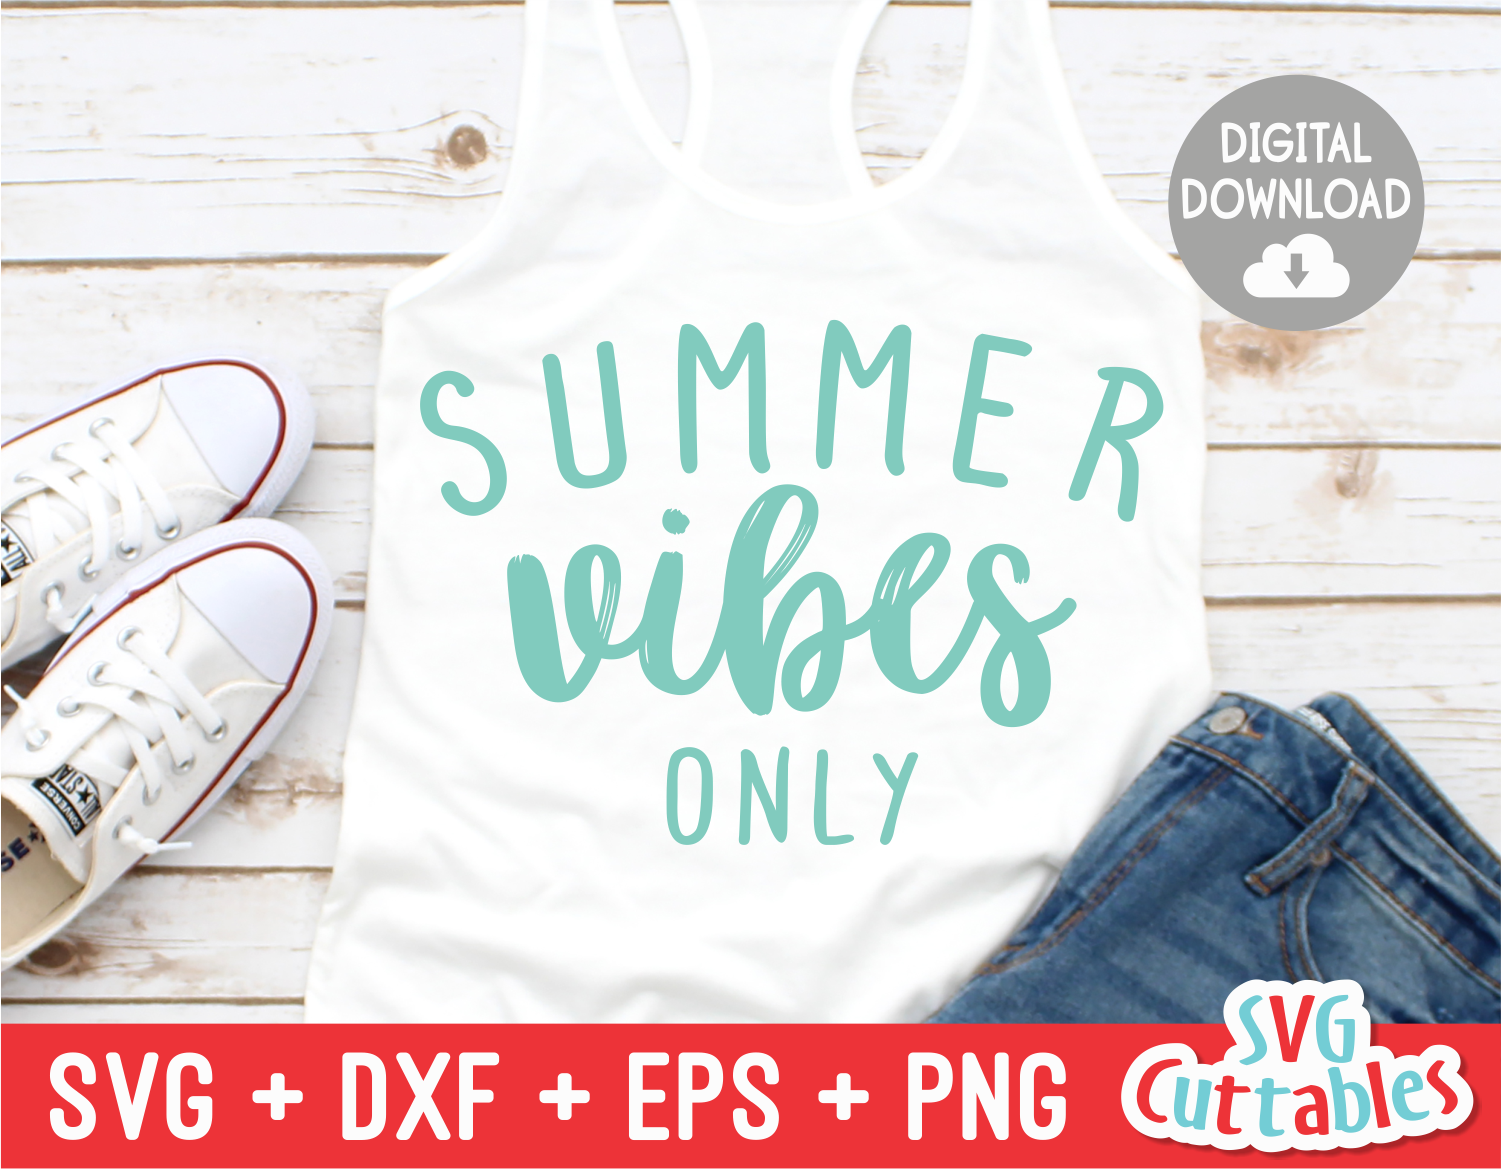 Download Summer Vibes Only | SVG Cut File | svgcuttablefiles